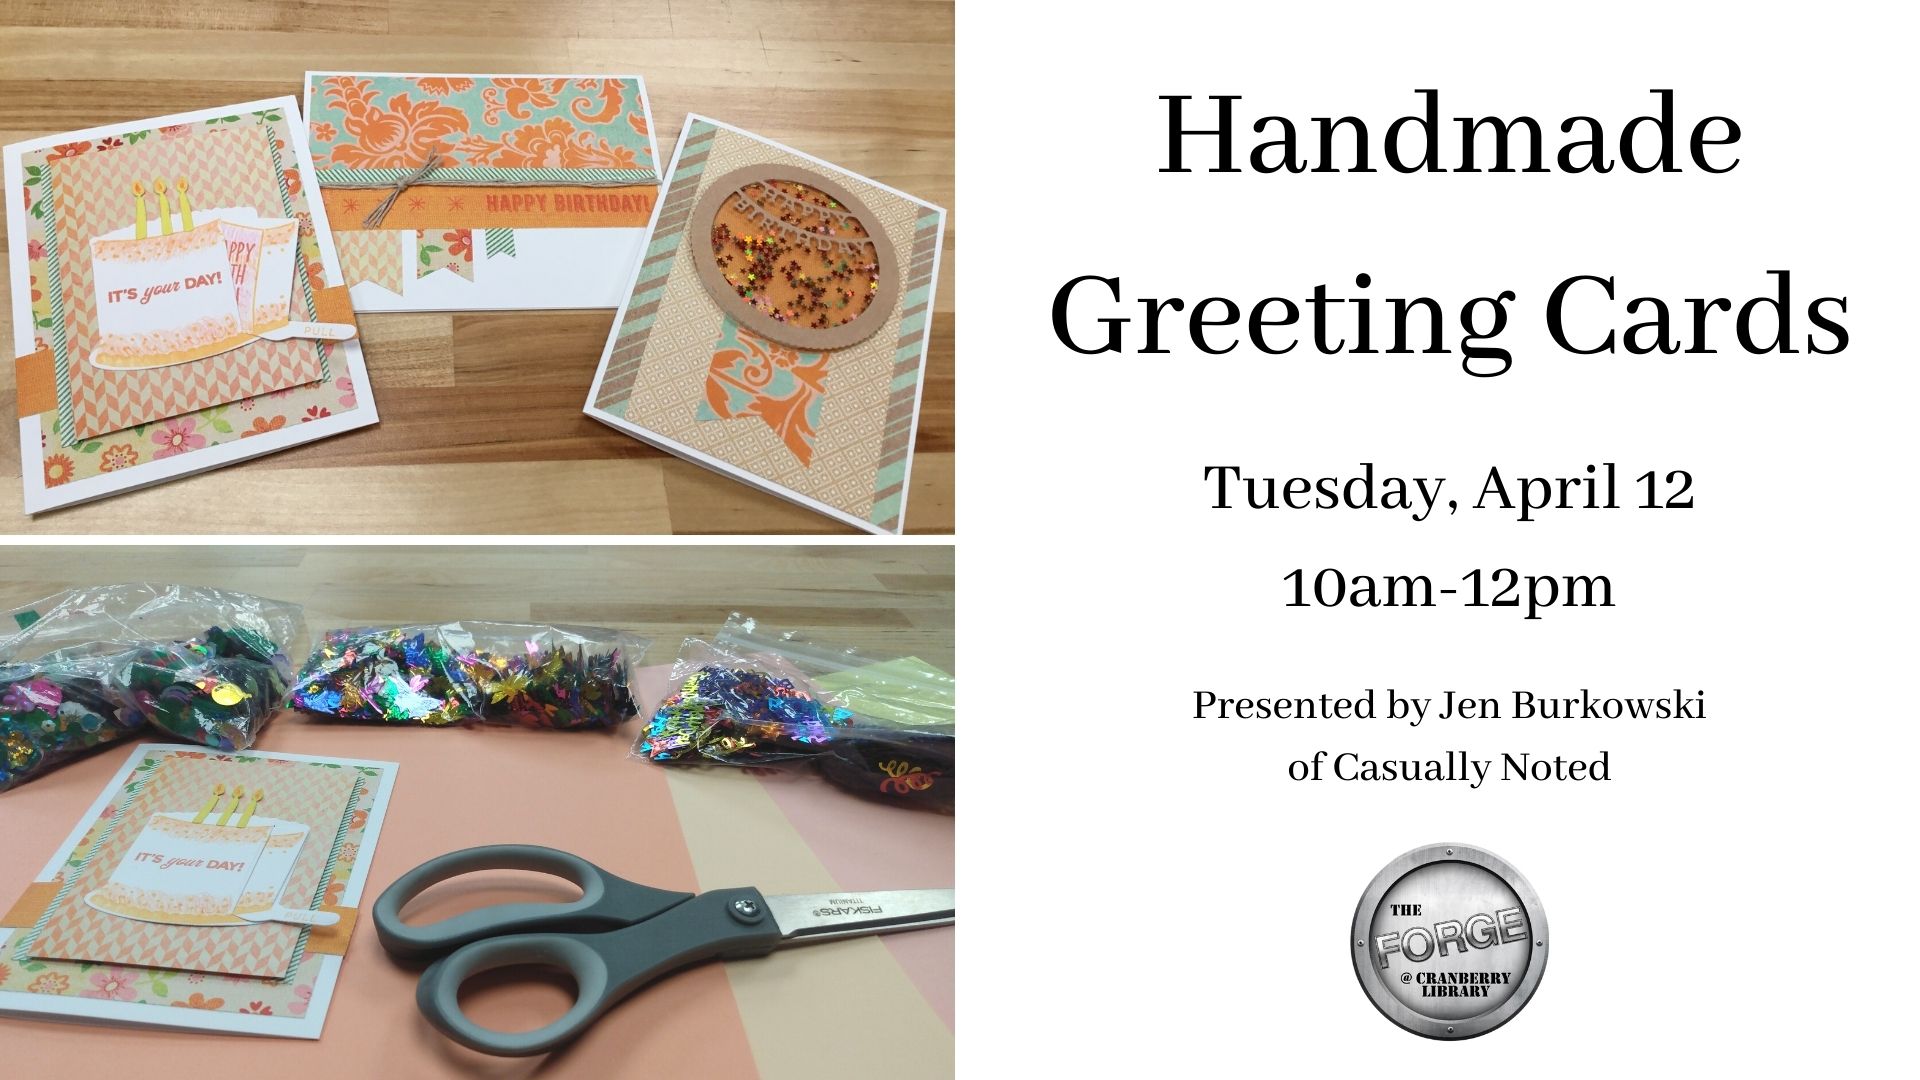 Flyer with photos of handmade greeting cards and crafting supplies